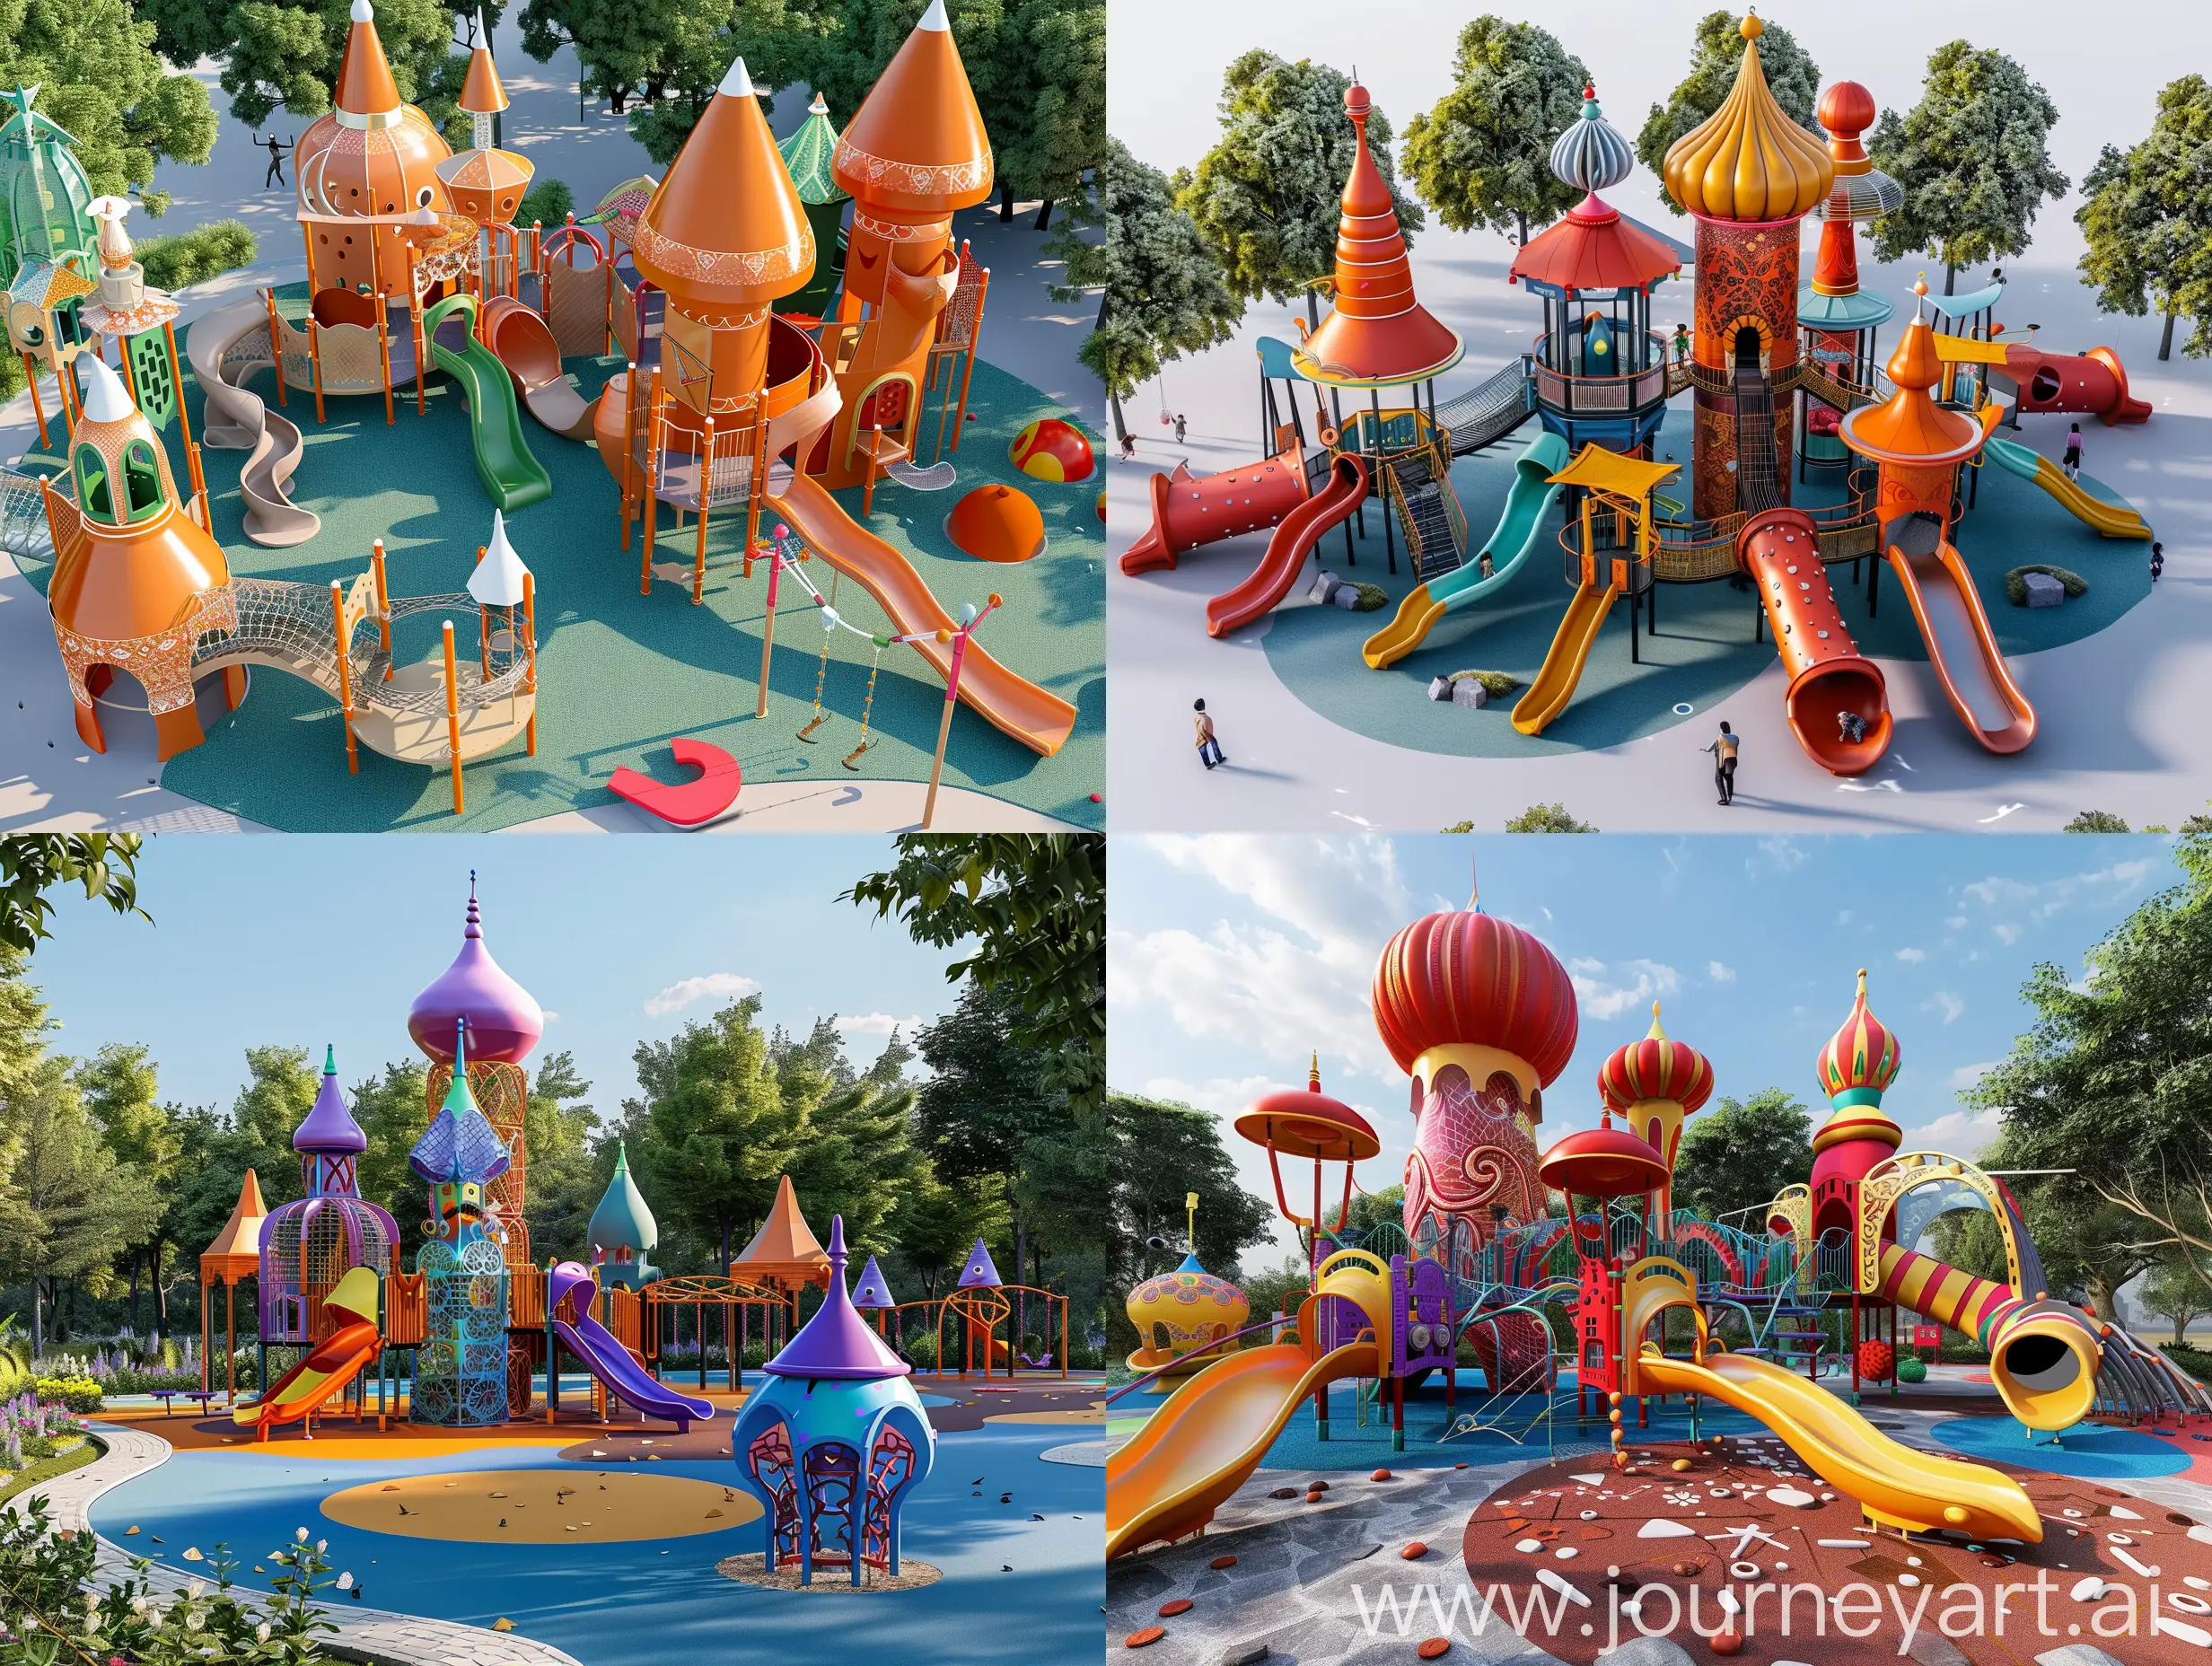 create me an image of Persian Inspired minimal and modern style of design Playgrounds
Concept:Children's playgrounds inspired by Persian fairy tales and stories. These playgrounds feature equipment shaped like characters and elements from these stories.
Design Style:Style: Fun and imaginative with traditional story elements.Trend: Thematic playgrounds for educational play.
Details:Form and Shape: Play equipment shaped like story characters.Structure: Safe and solid.Dimensions: Varied.Material: Metal, plastic.Color: Bright, engaging colors.Features: Swings, slides, climbing structures.Location: Parks, playgrounds.
Prompt:"Design a children's playground inspired by Persian fairy tales, featuring equipment shaped like characters and elements from the stories. Made from metal and plastic, with bright engaging colors, suitable for parks and playgrounds, focusing on educational and imaginative play."playground design layout style